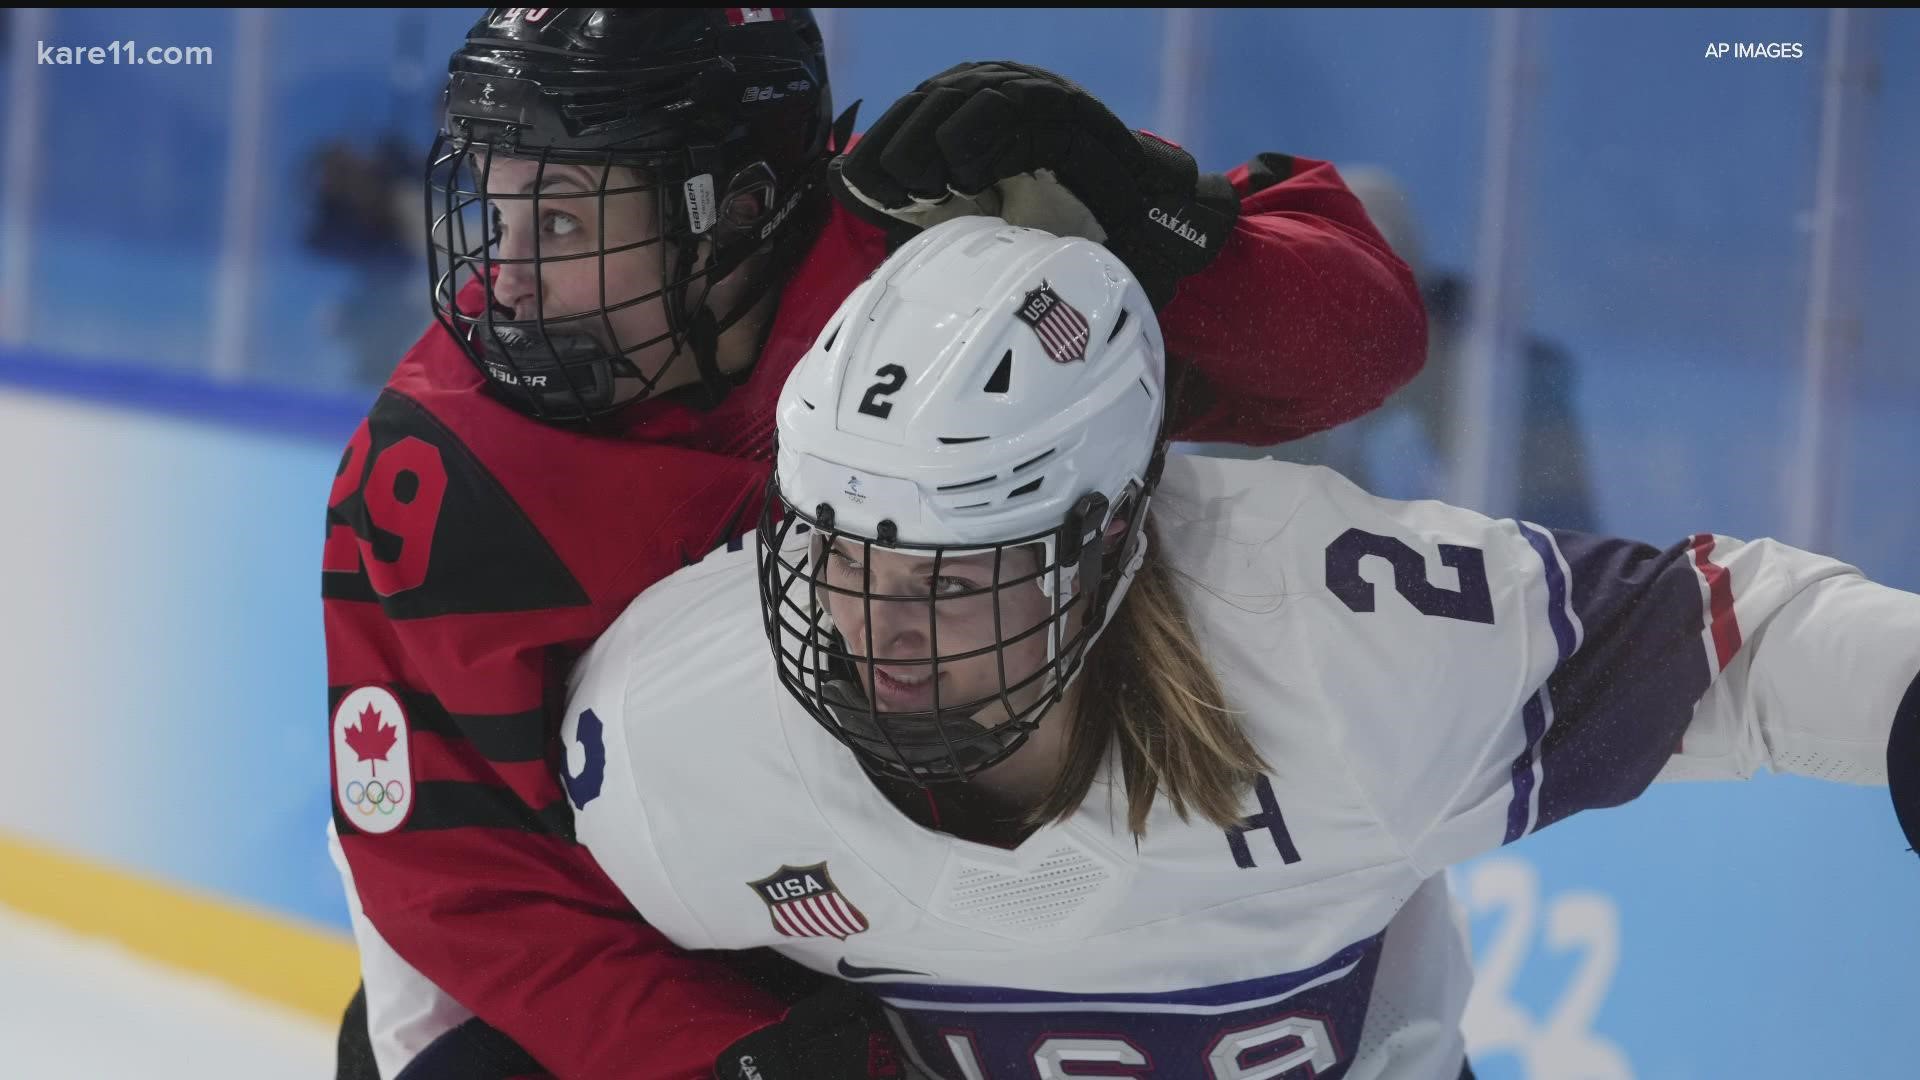 Despite a late third-period push, the U.S. women's hockey team fell to Team Canada to earn the silver medal at Beijing.